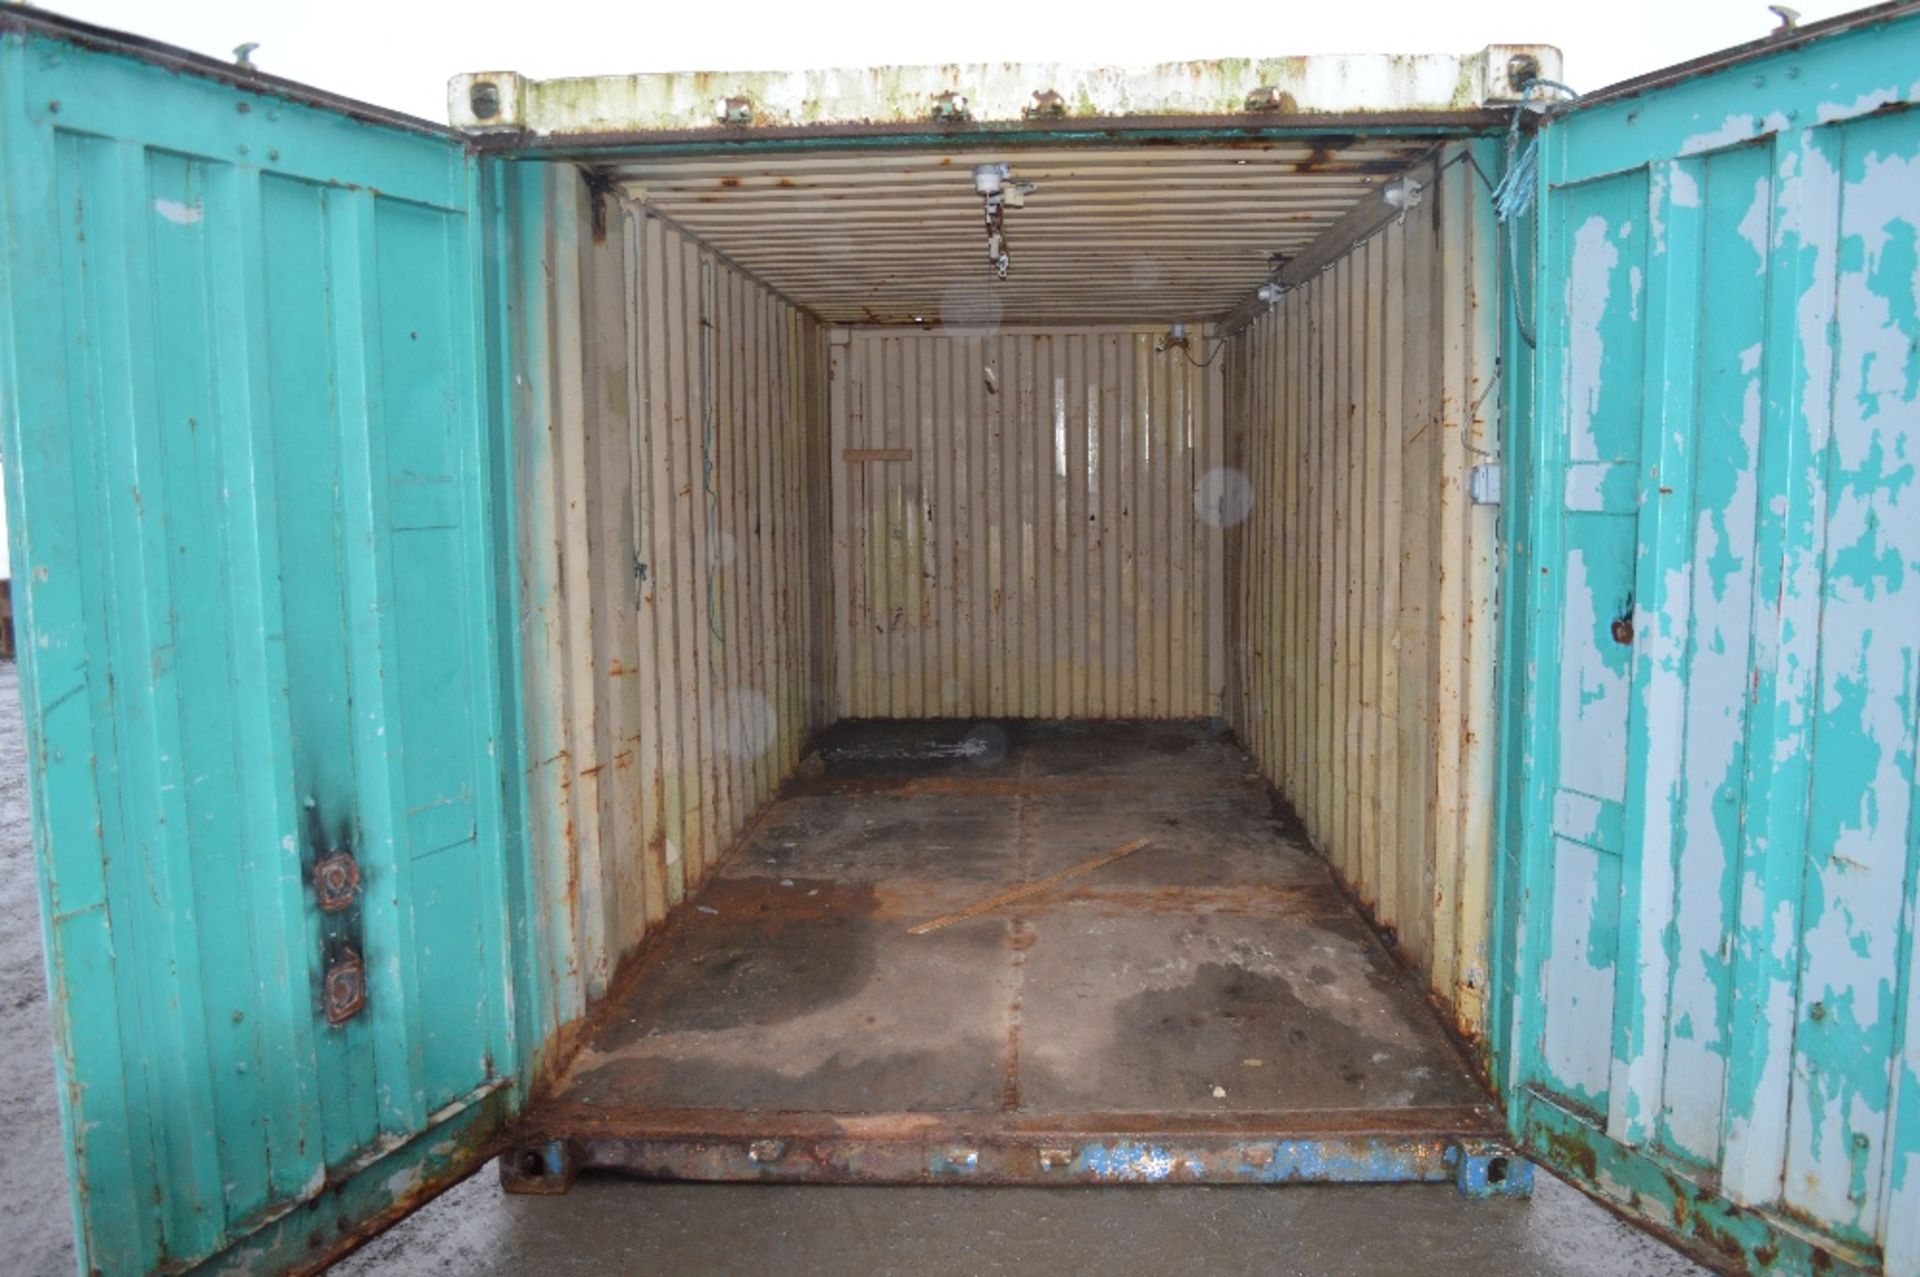 20 ft x 8 ft steel shipping container
BB062 - Image 3 of 3